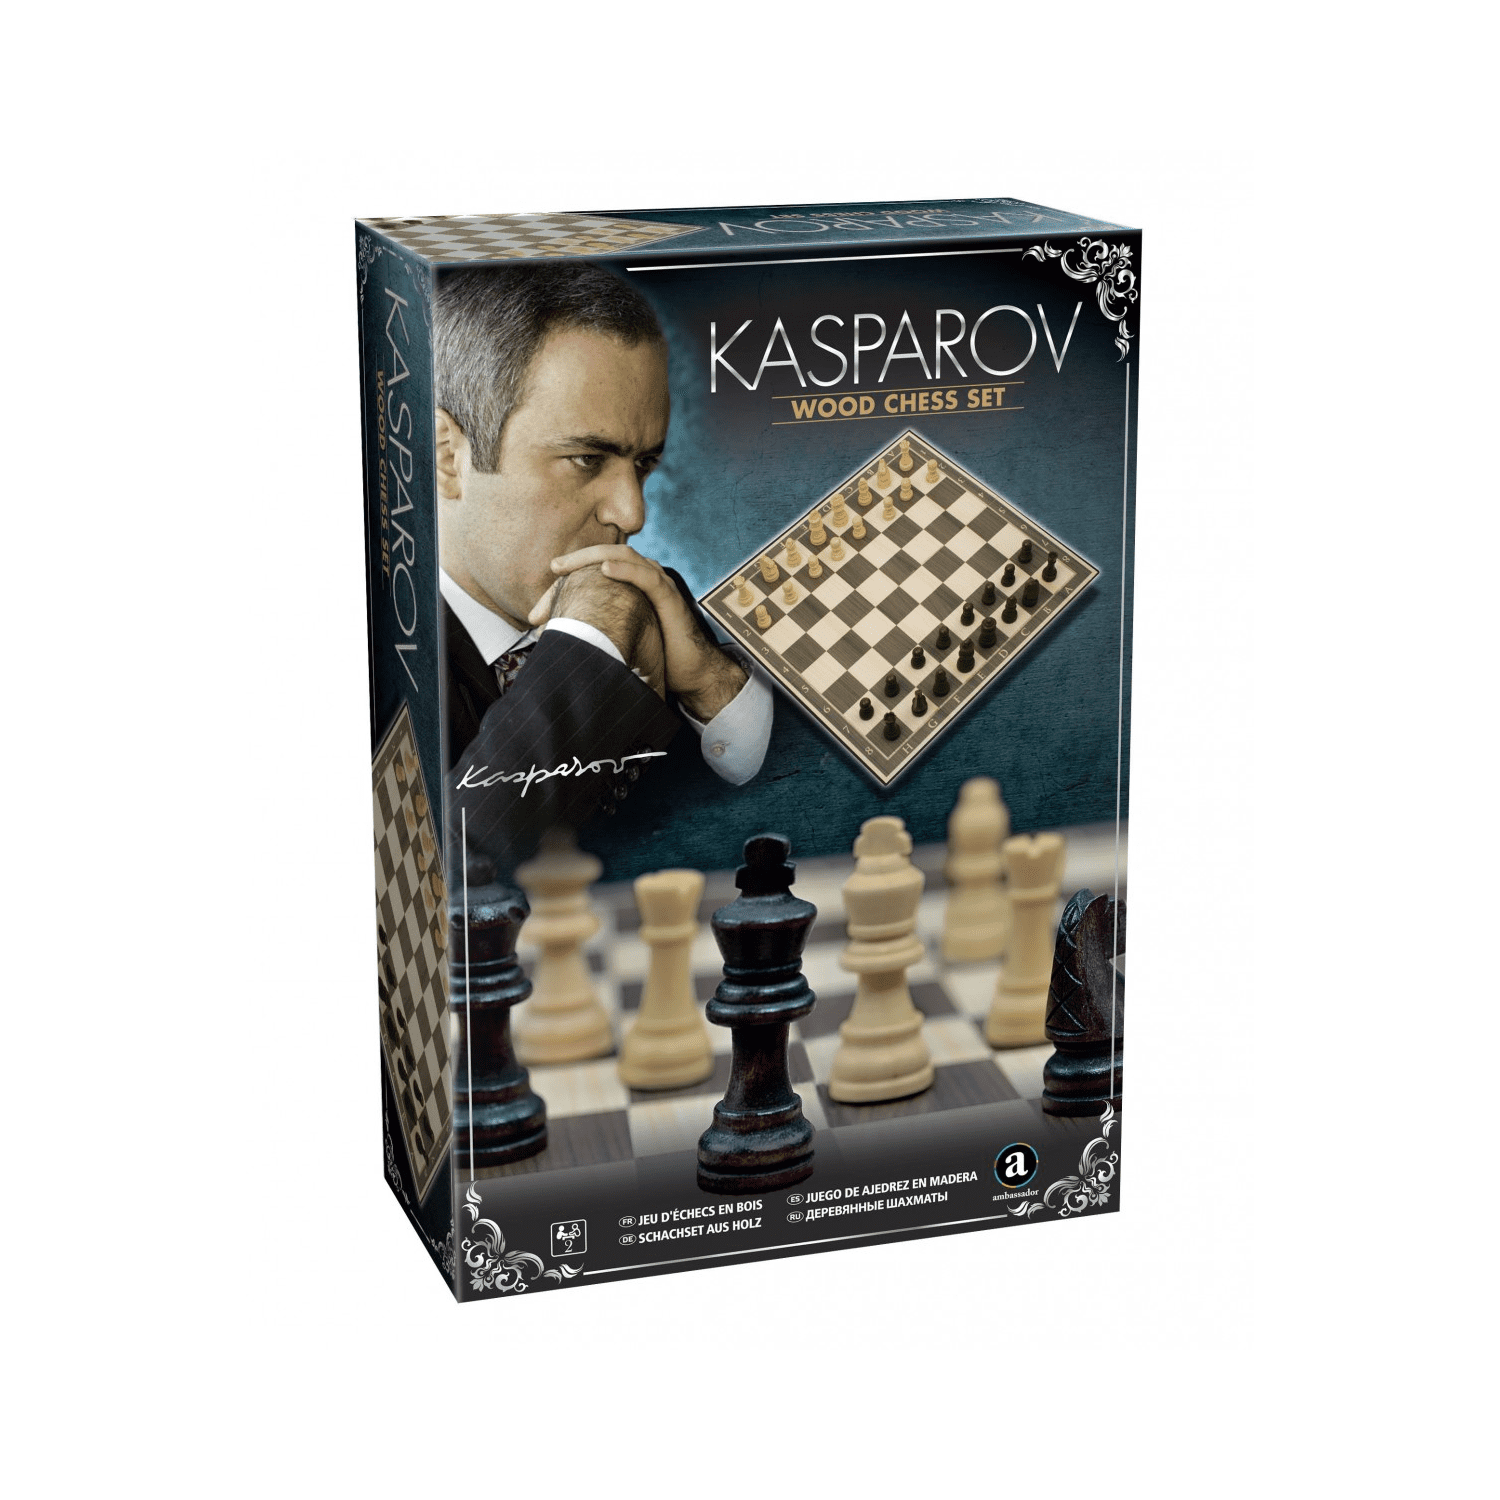 Kasparovchess - Learn and improve playing chess online